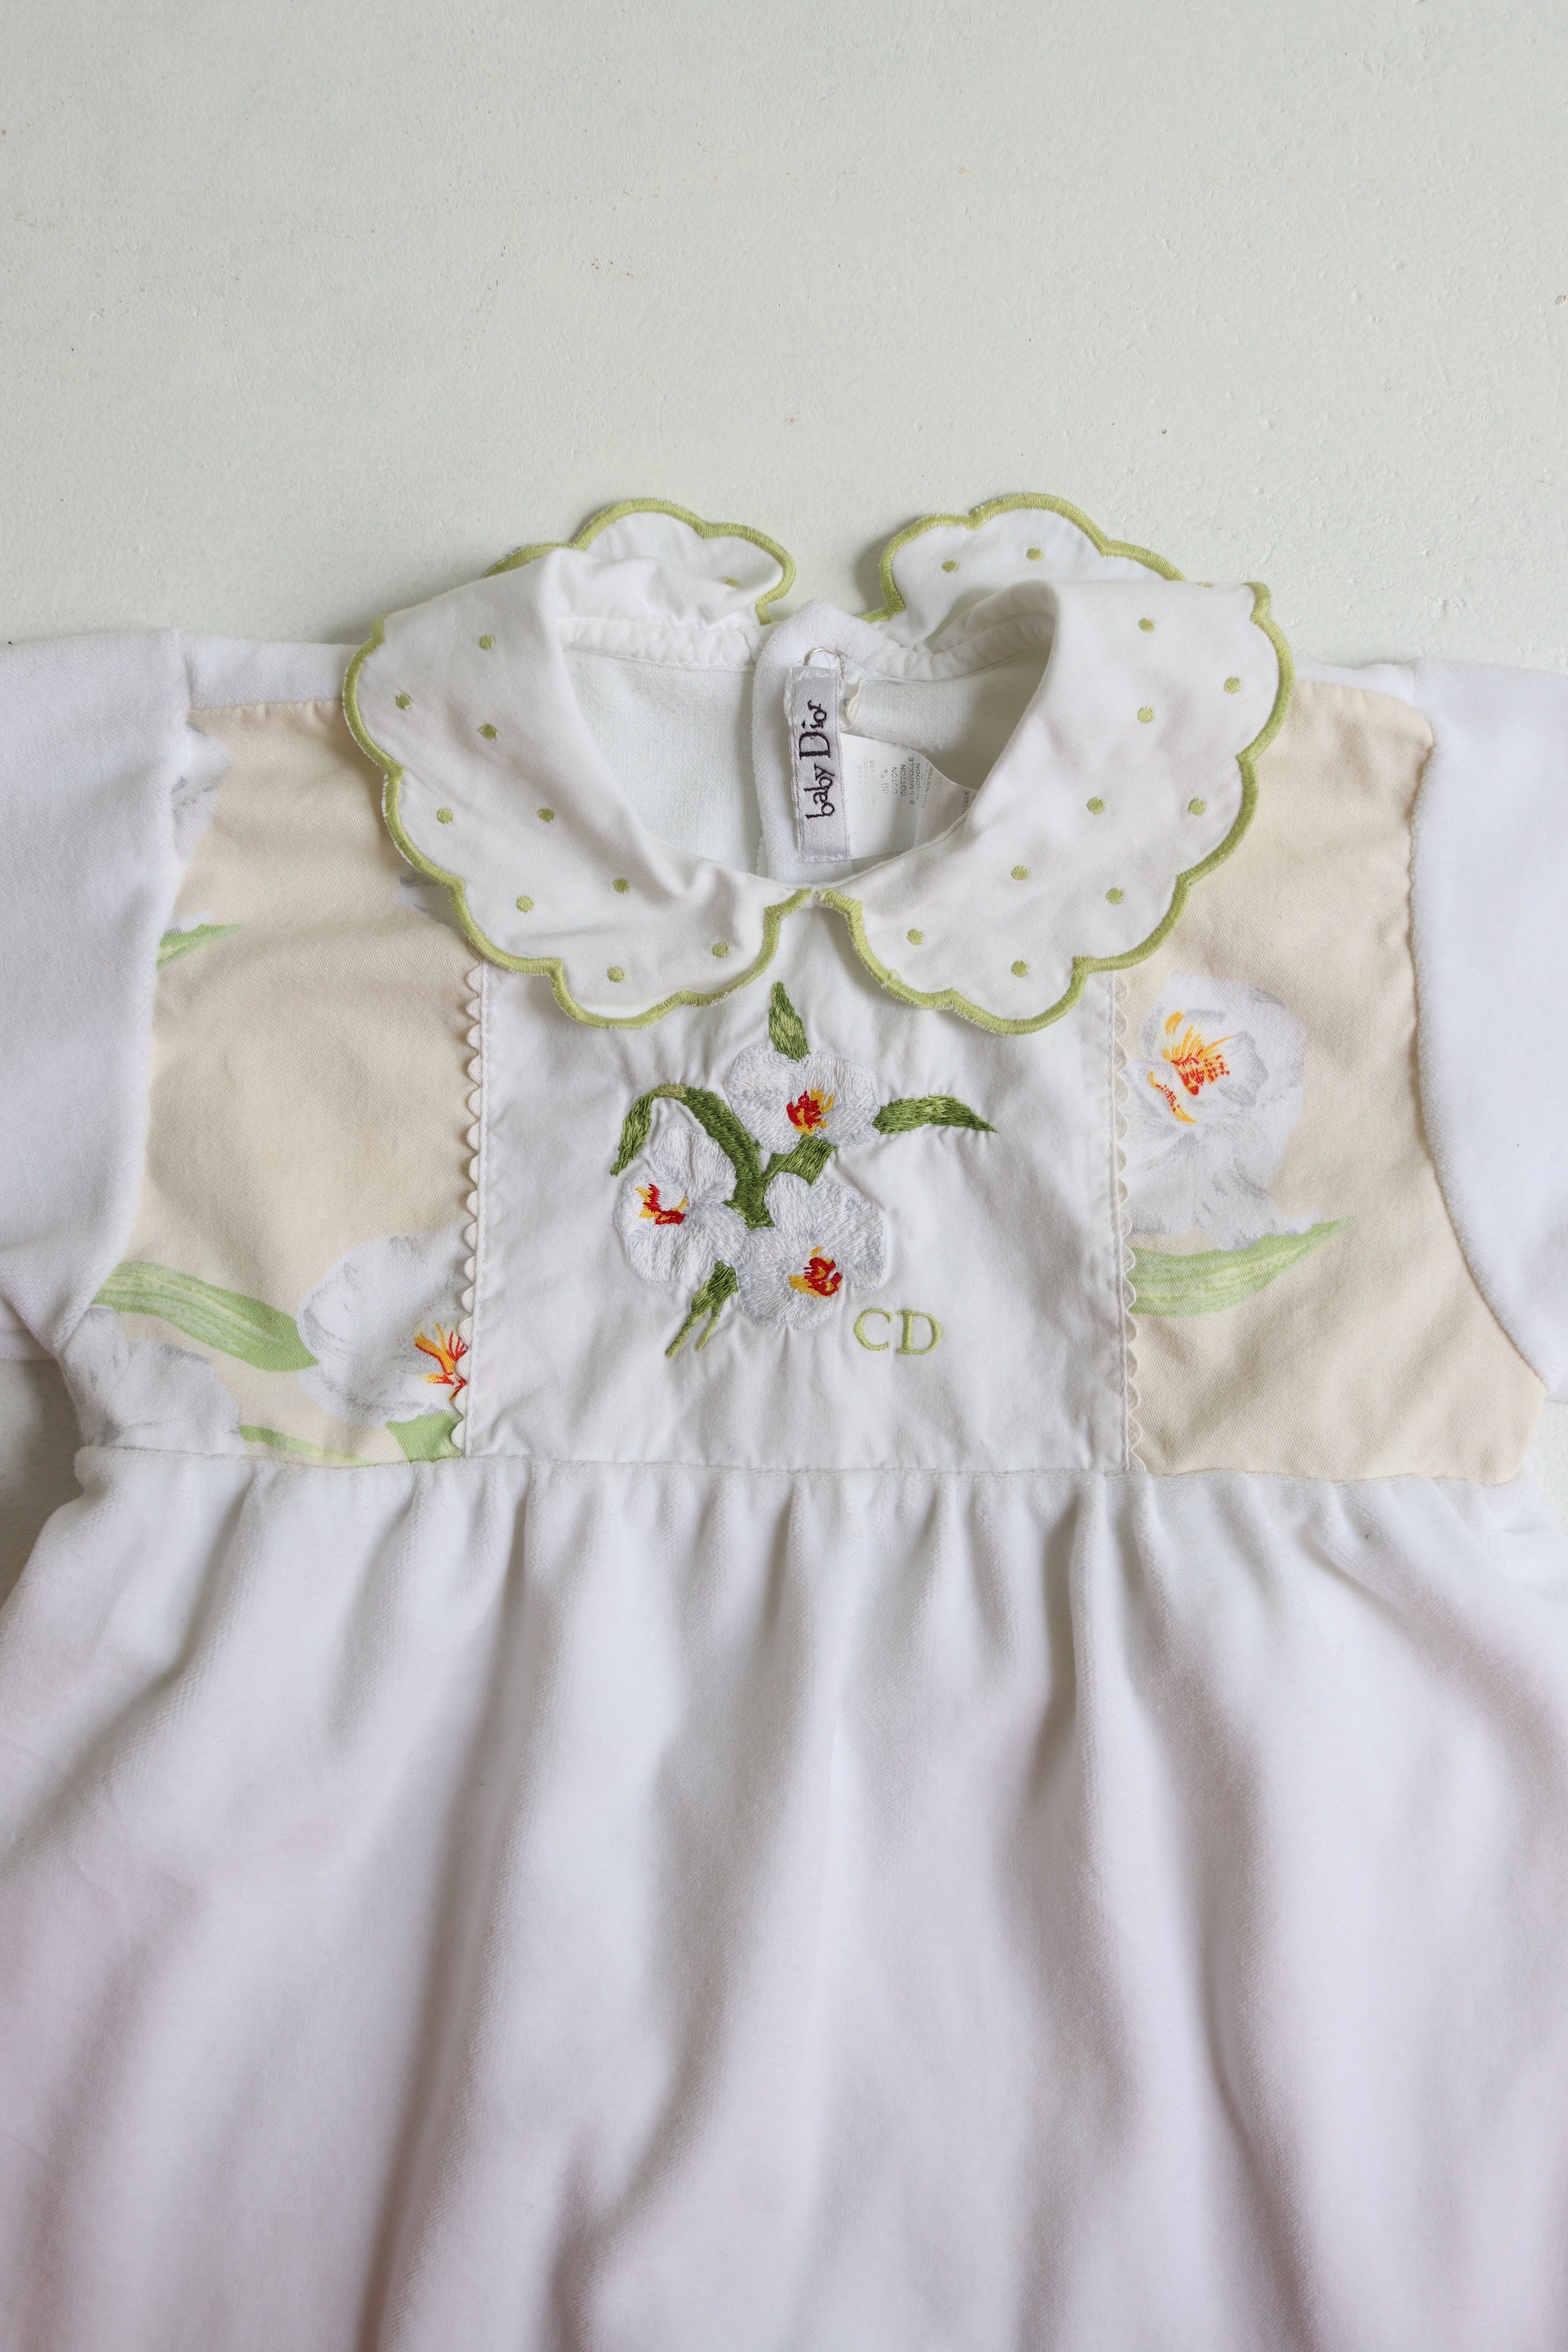 Vintage baby Dior one piece with floral detail - Size 12 months